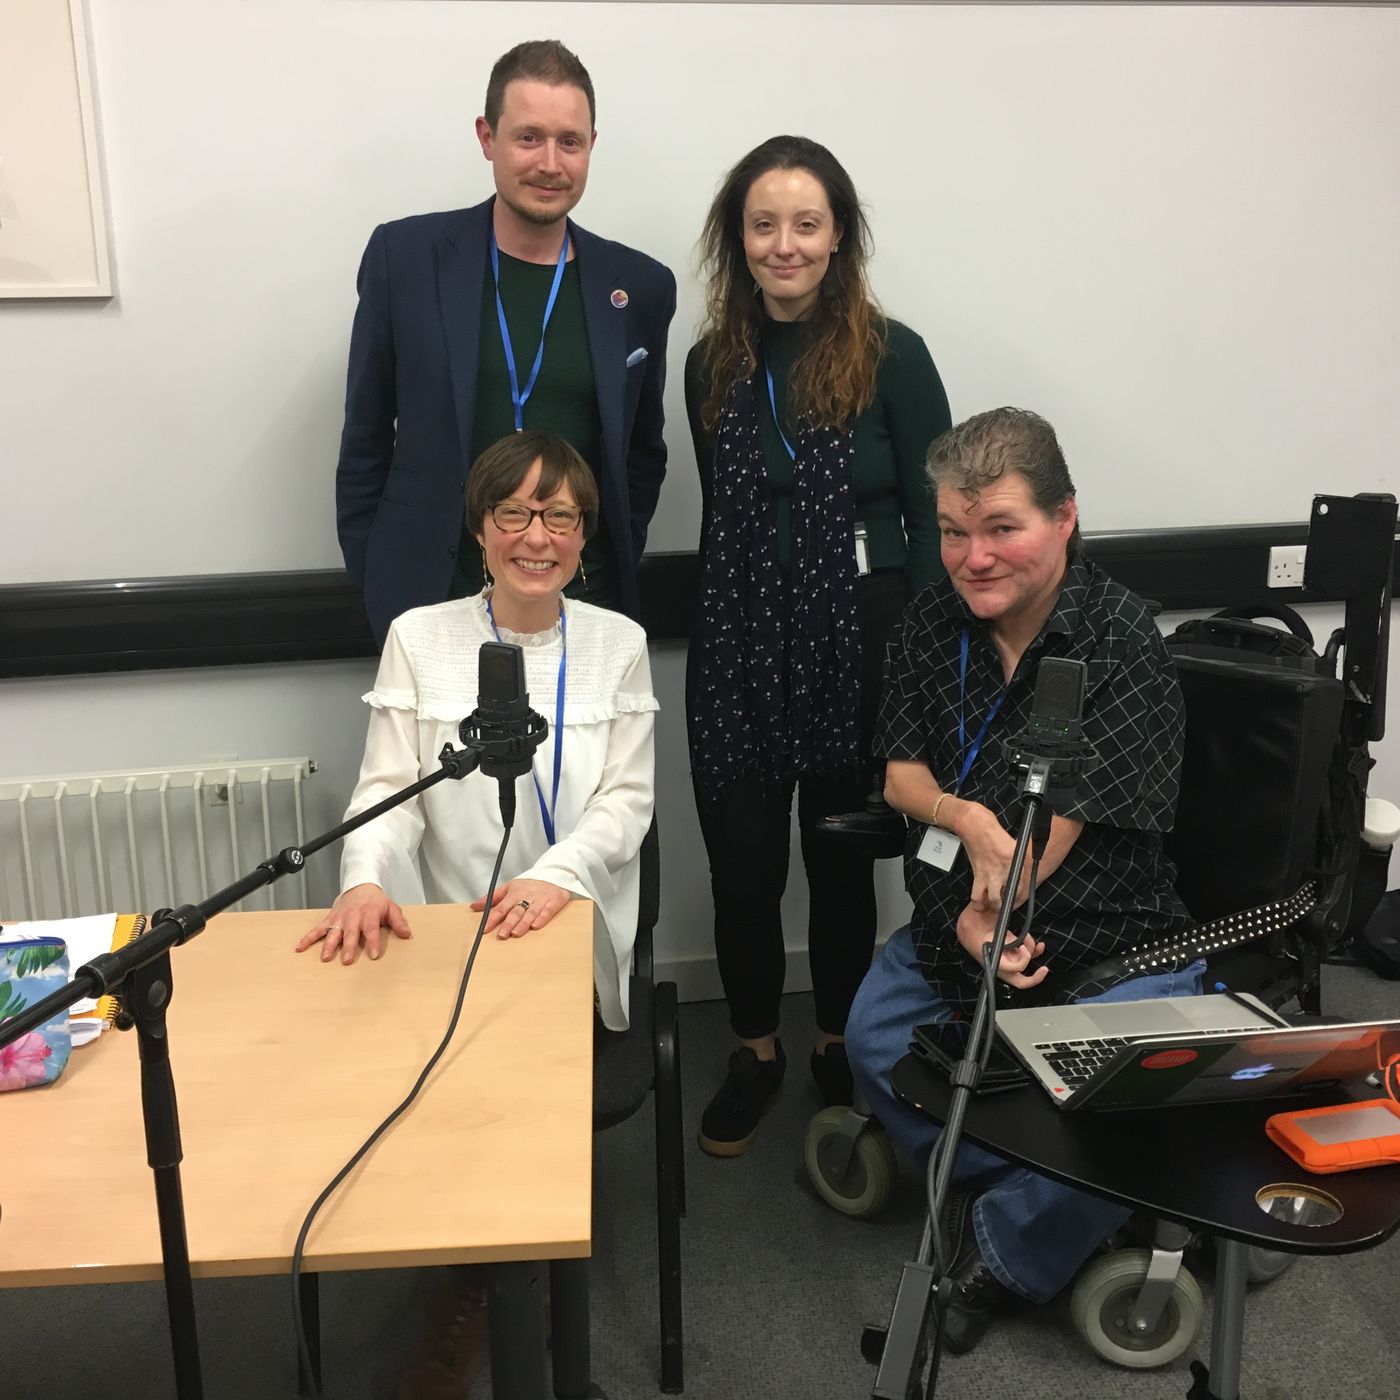 4. 'We don’t fit in a box!' Exploring disability, innovation and music-making with John Kelly, Siggy Patchitt and Siobhan Clough